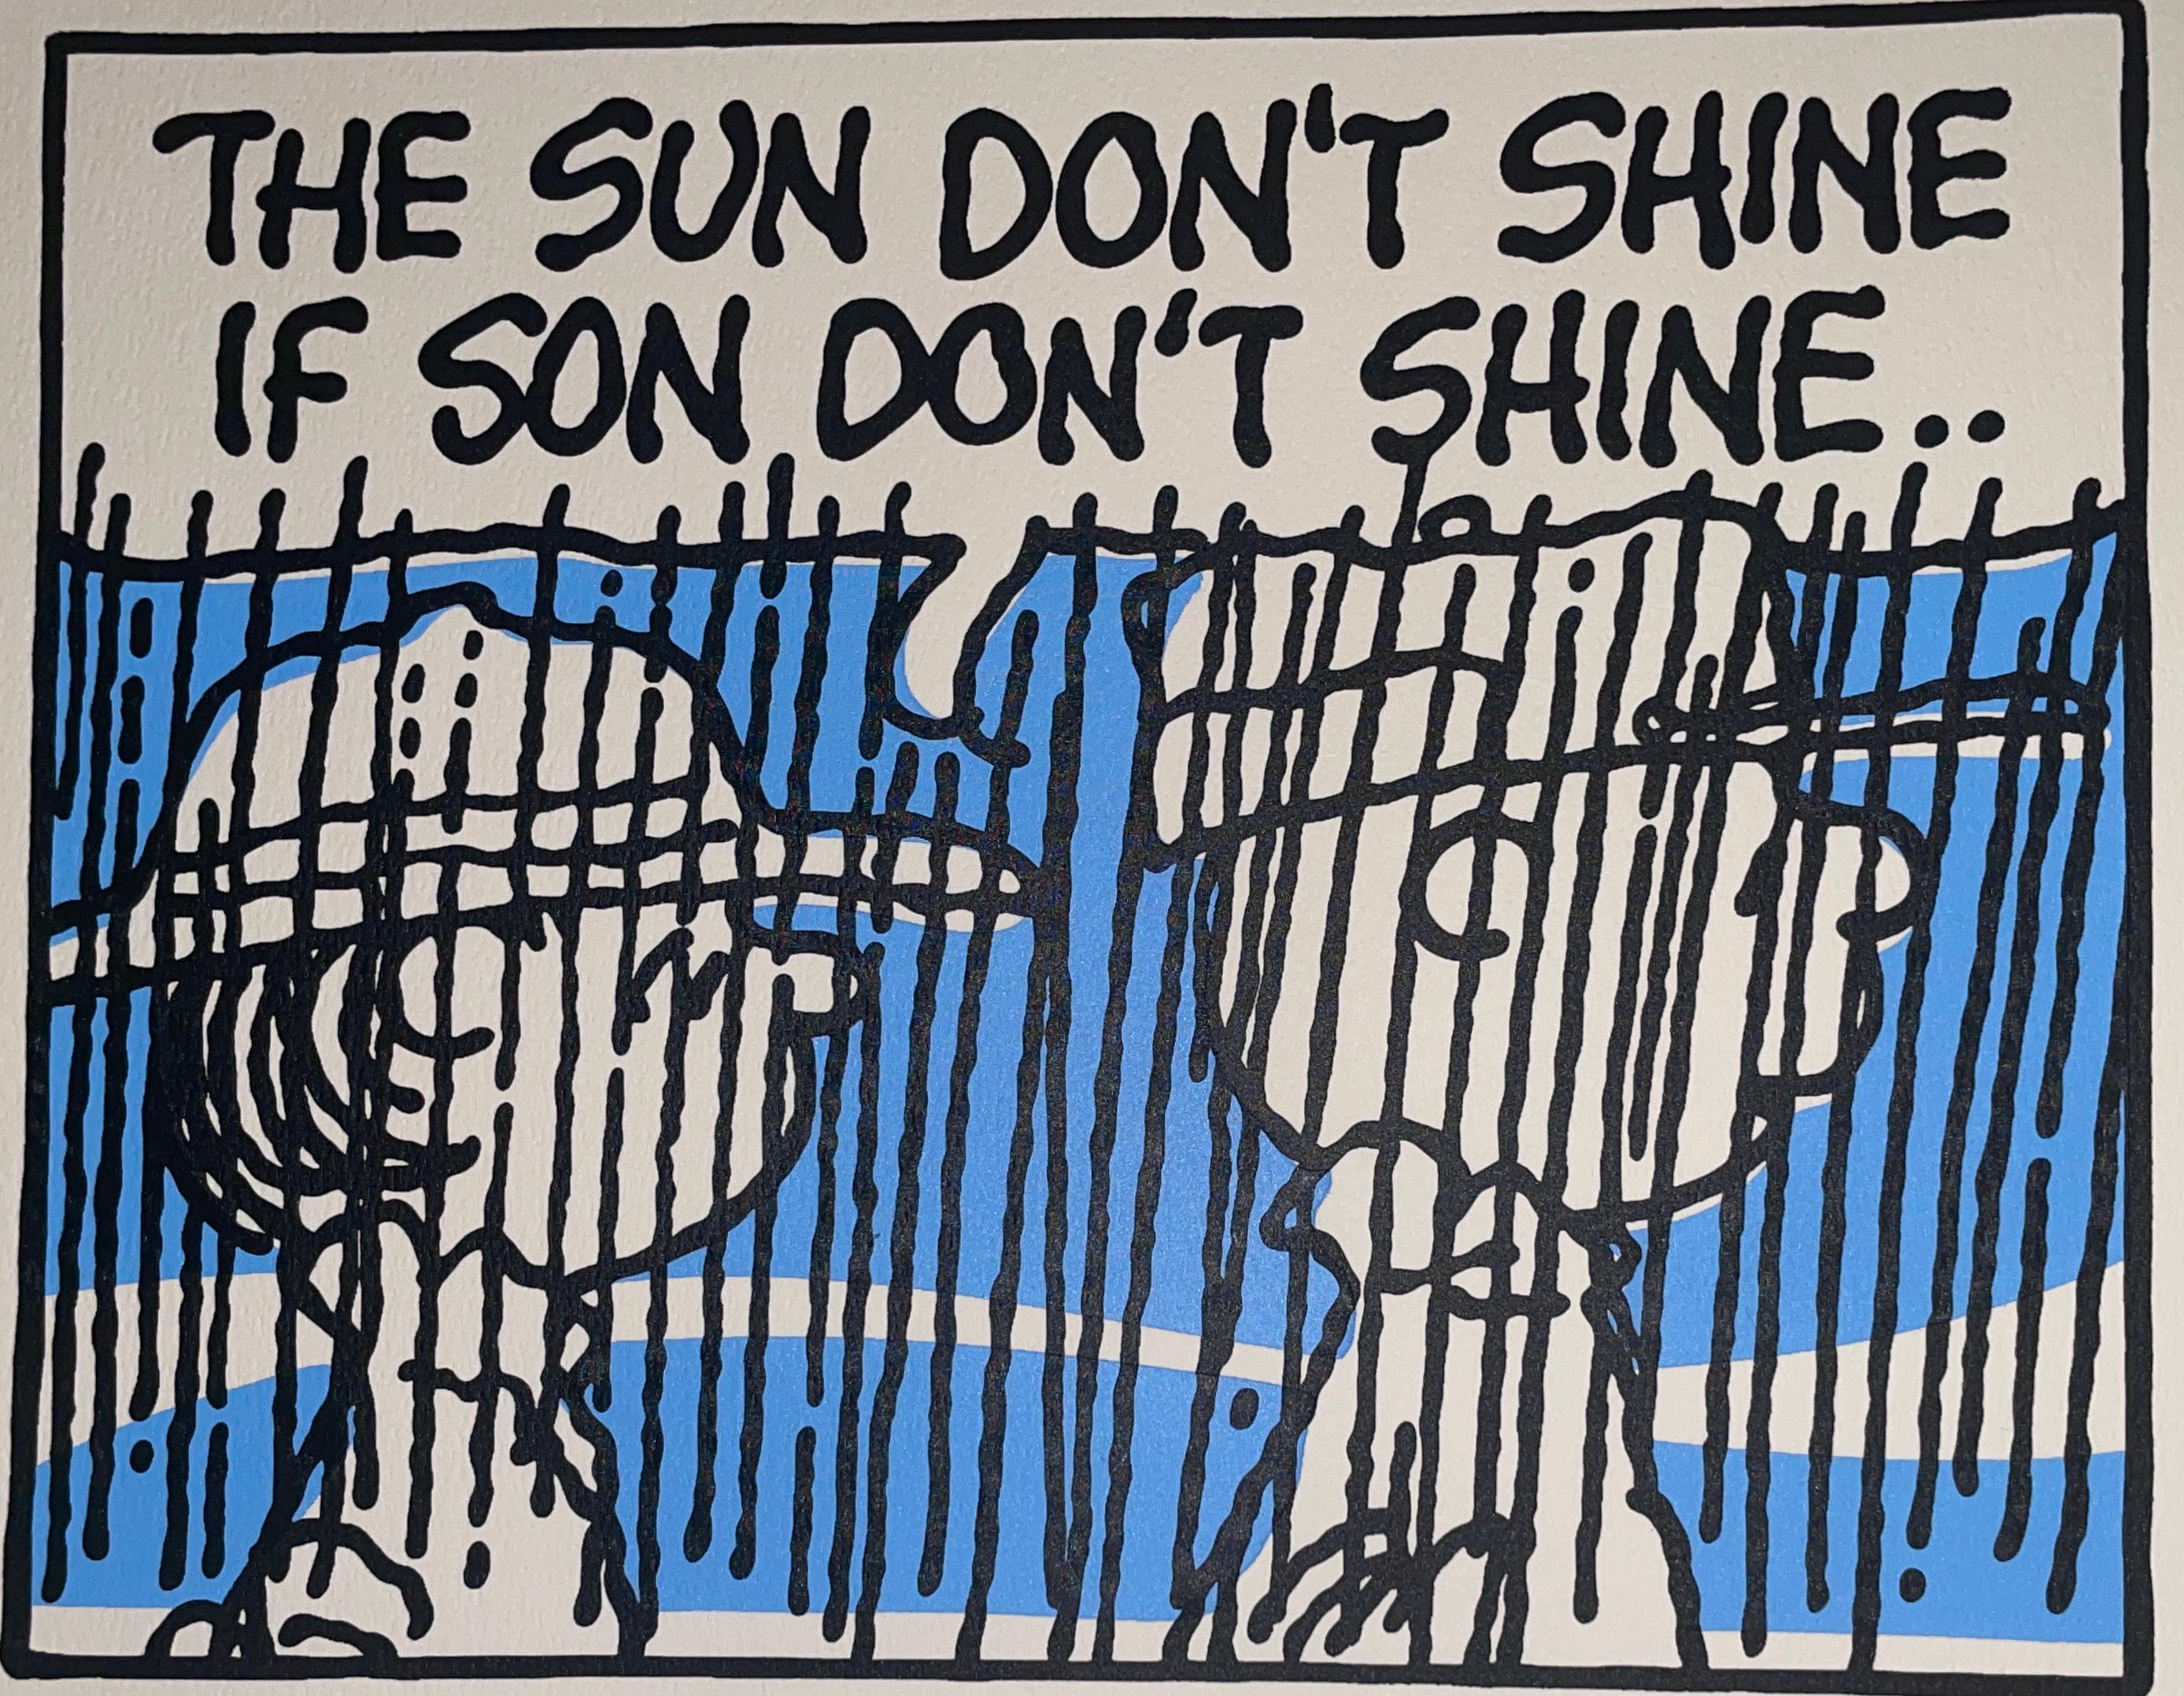 Mark Drew
Mark Drew Screen print Jay-Z The Takeover “The Sun Don’t Shine, If Son Don’t Shine” Contemporary Street Art, 2023
Screen Print on fine art paper
16 1/2 × 11 7/10 in | 41.9 × 29.7 cm
Edition of 200

Materials:
Screen Print on fine art